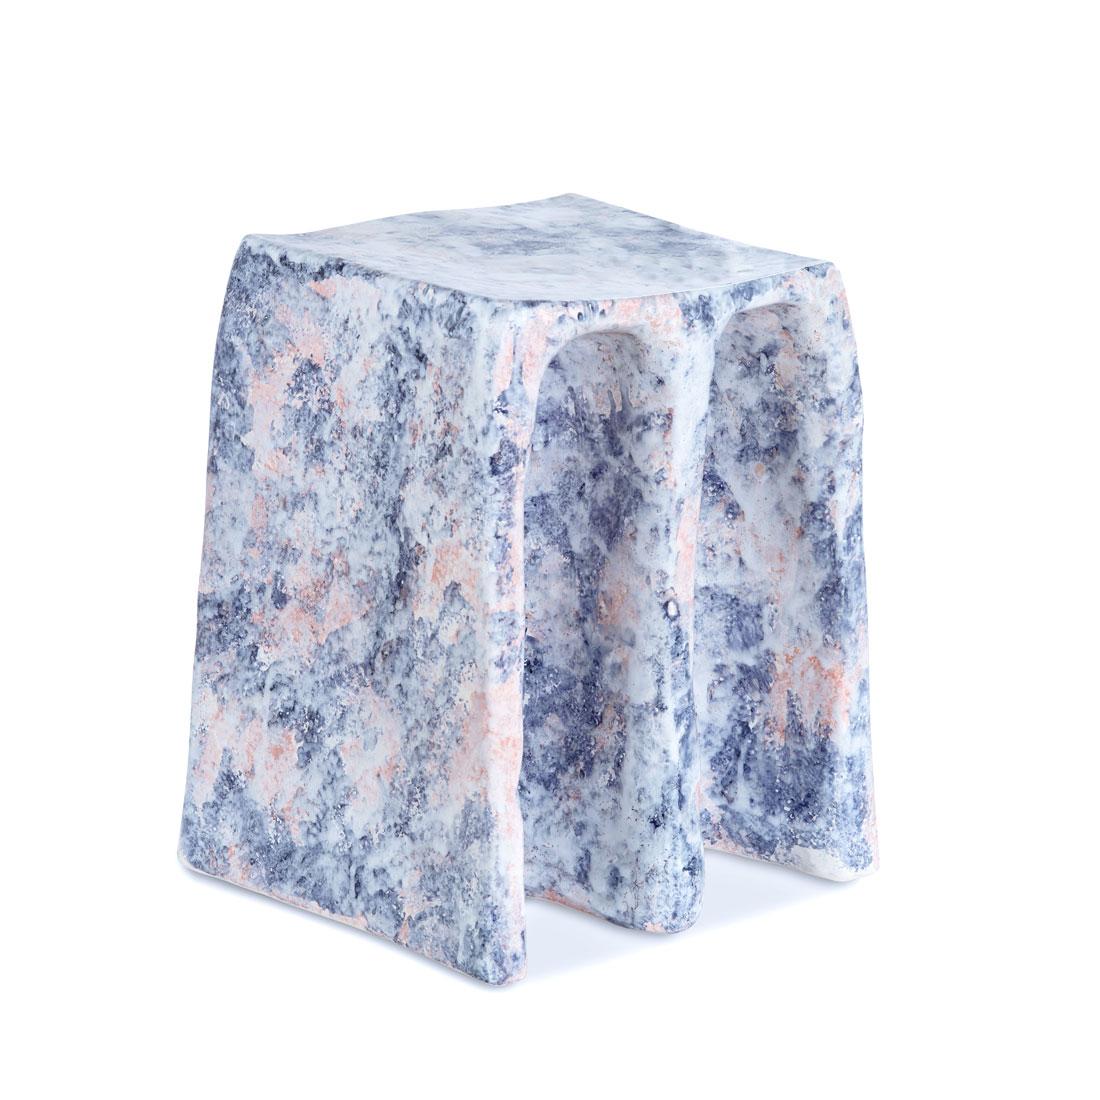 Chouchou Marble White Stool by Pulpo
Dimensions: D35 x W30 x H43 cm
Materials: ceramic

Also available in different Colours. Please contact us.

Whether stool or storage table, piece of column or inspired by the wrinkled folds of a curtain: in any